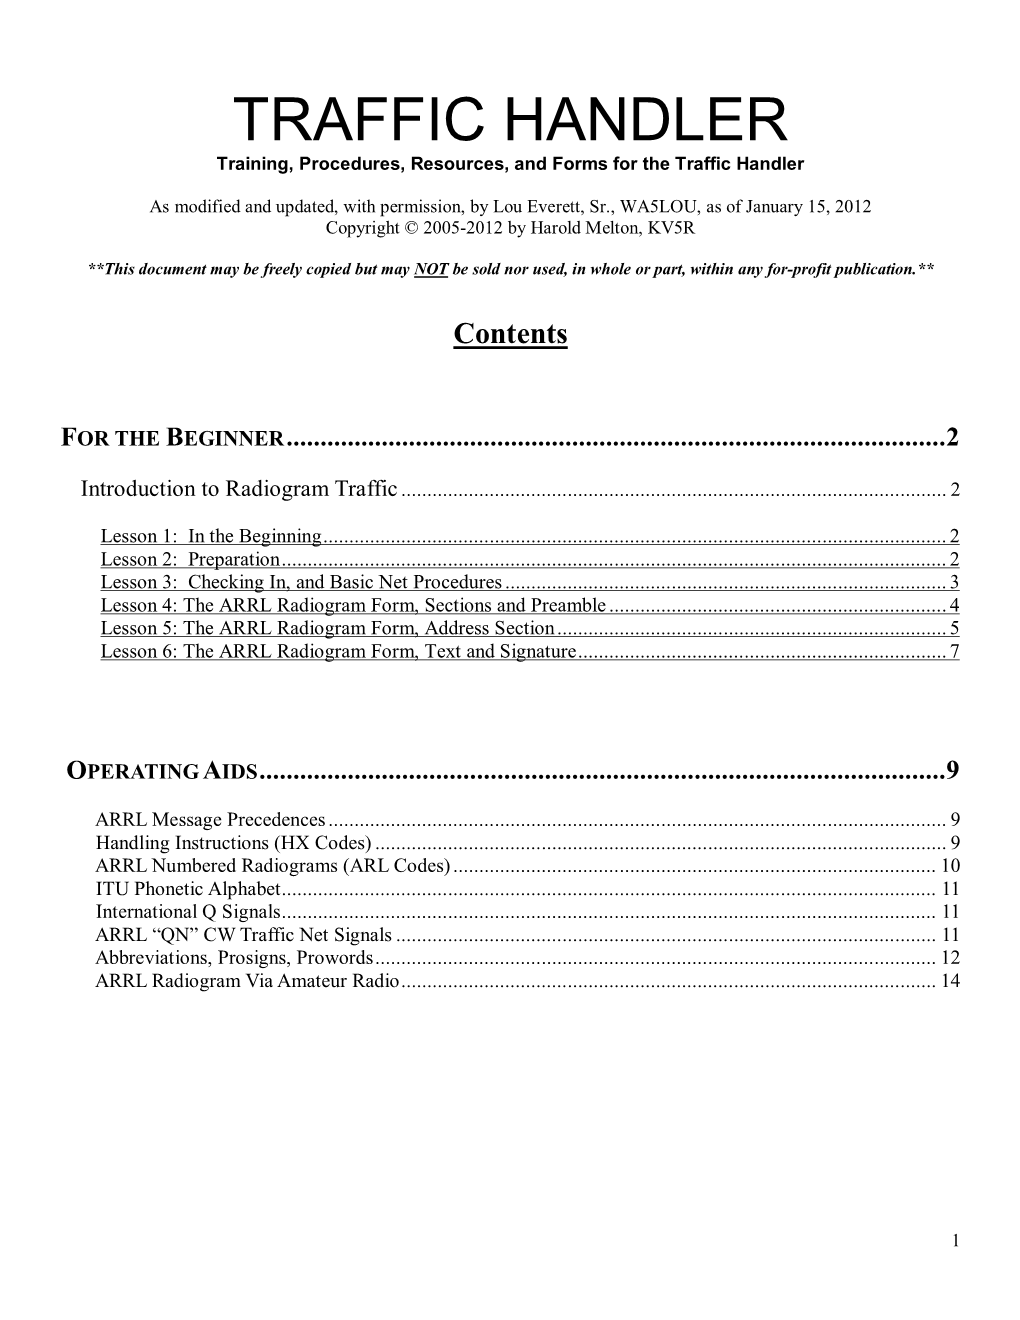 TRAFFIC HANDLER Training, Procedures, Resources, and Forms for the Traffic Handler